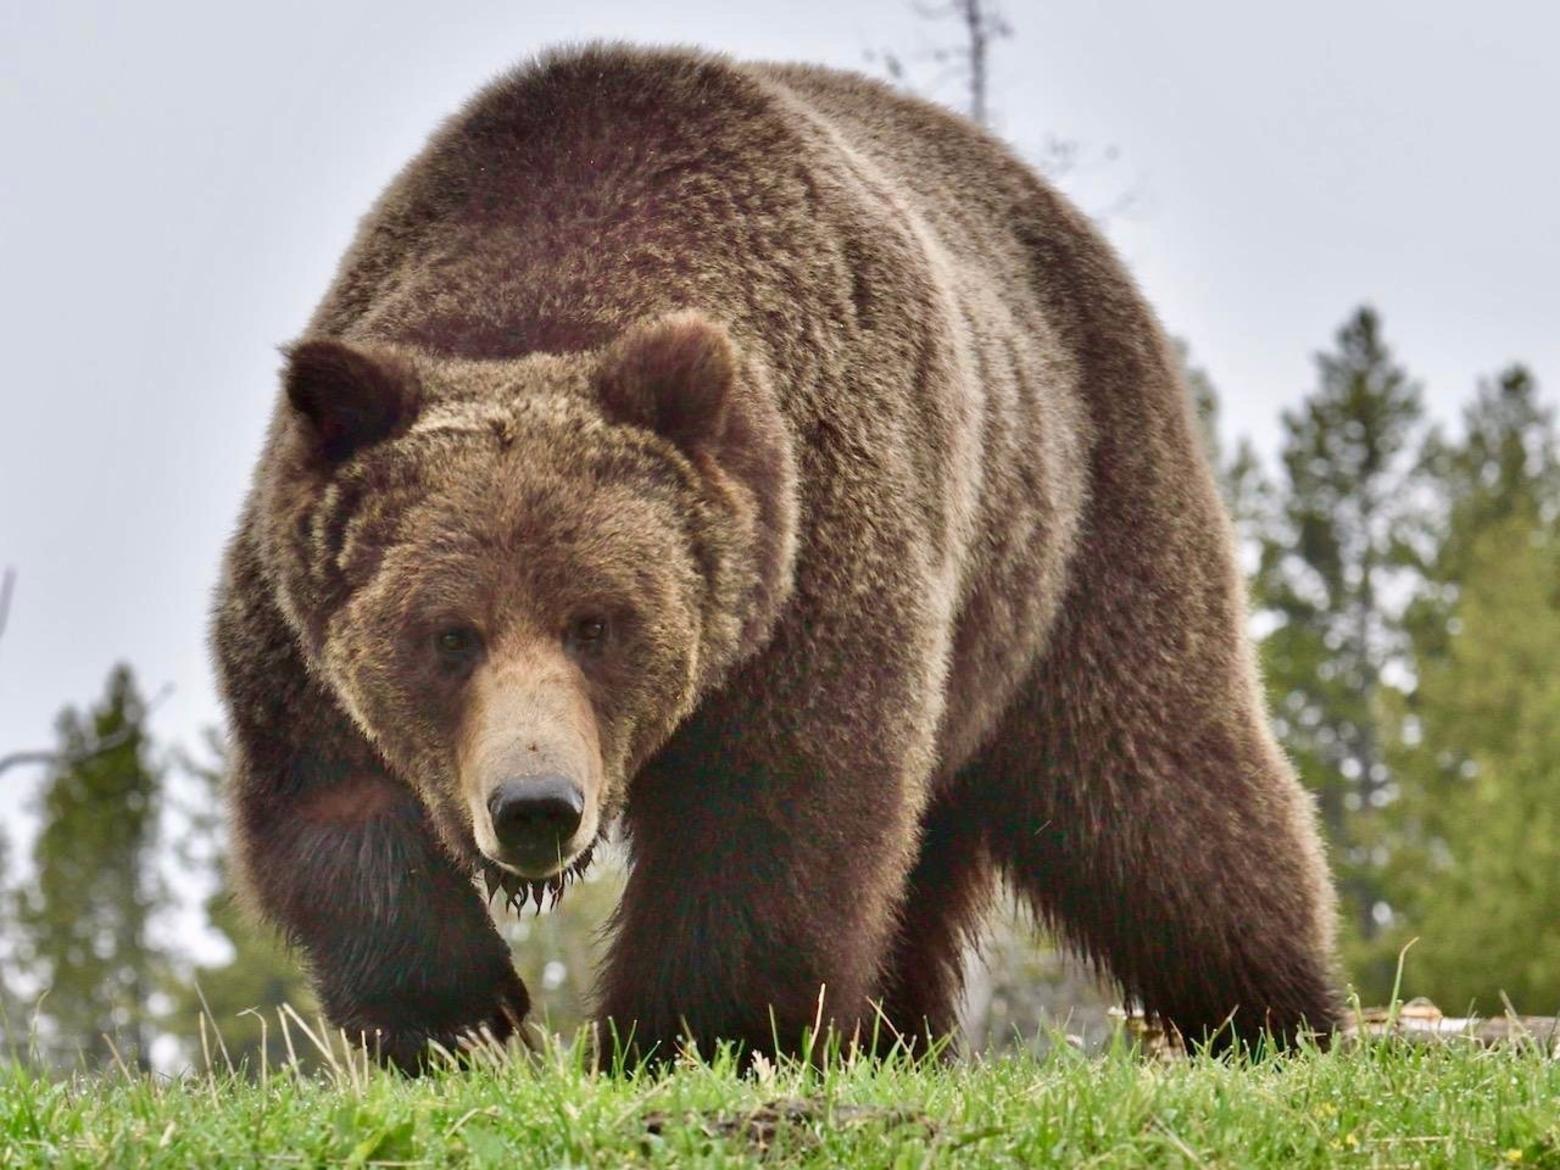 A Greater Yellowstone grizzly, part of just two healthy populations of grizzly bears in the Lower 48. What effect do mountain bikes have on wilderness and bears? For scientists who study them, there is no doubt.  Photo courtesy Steven Fuller